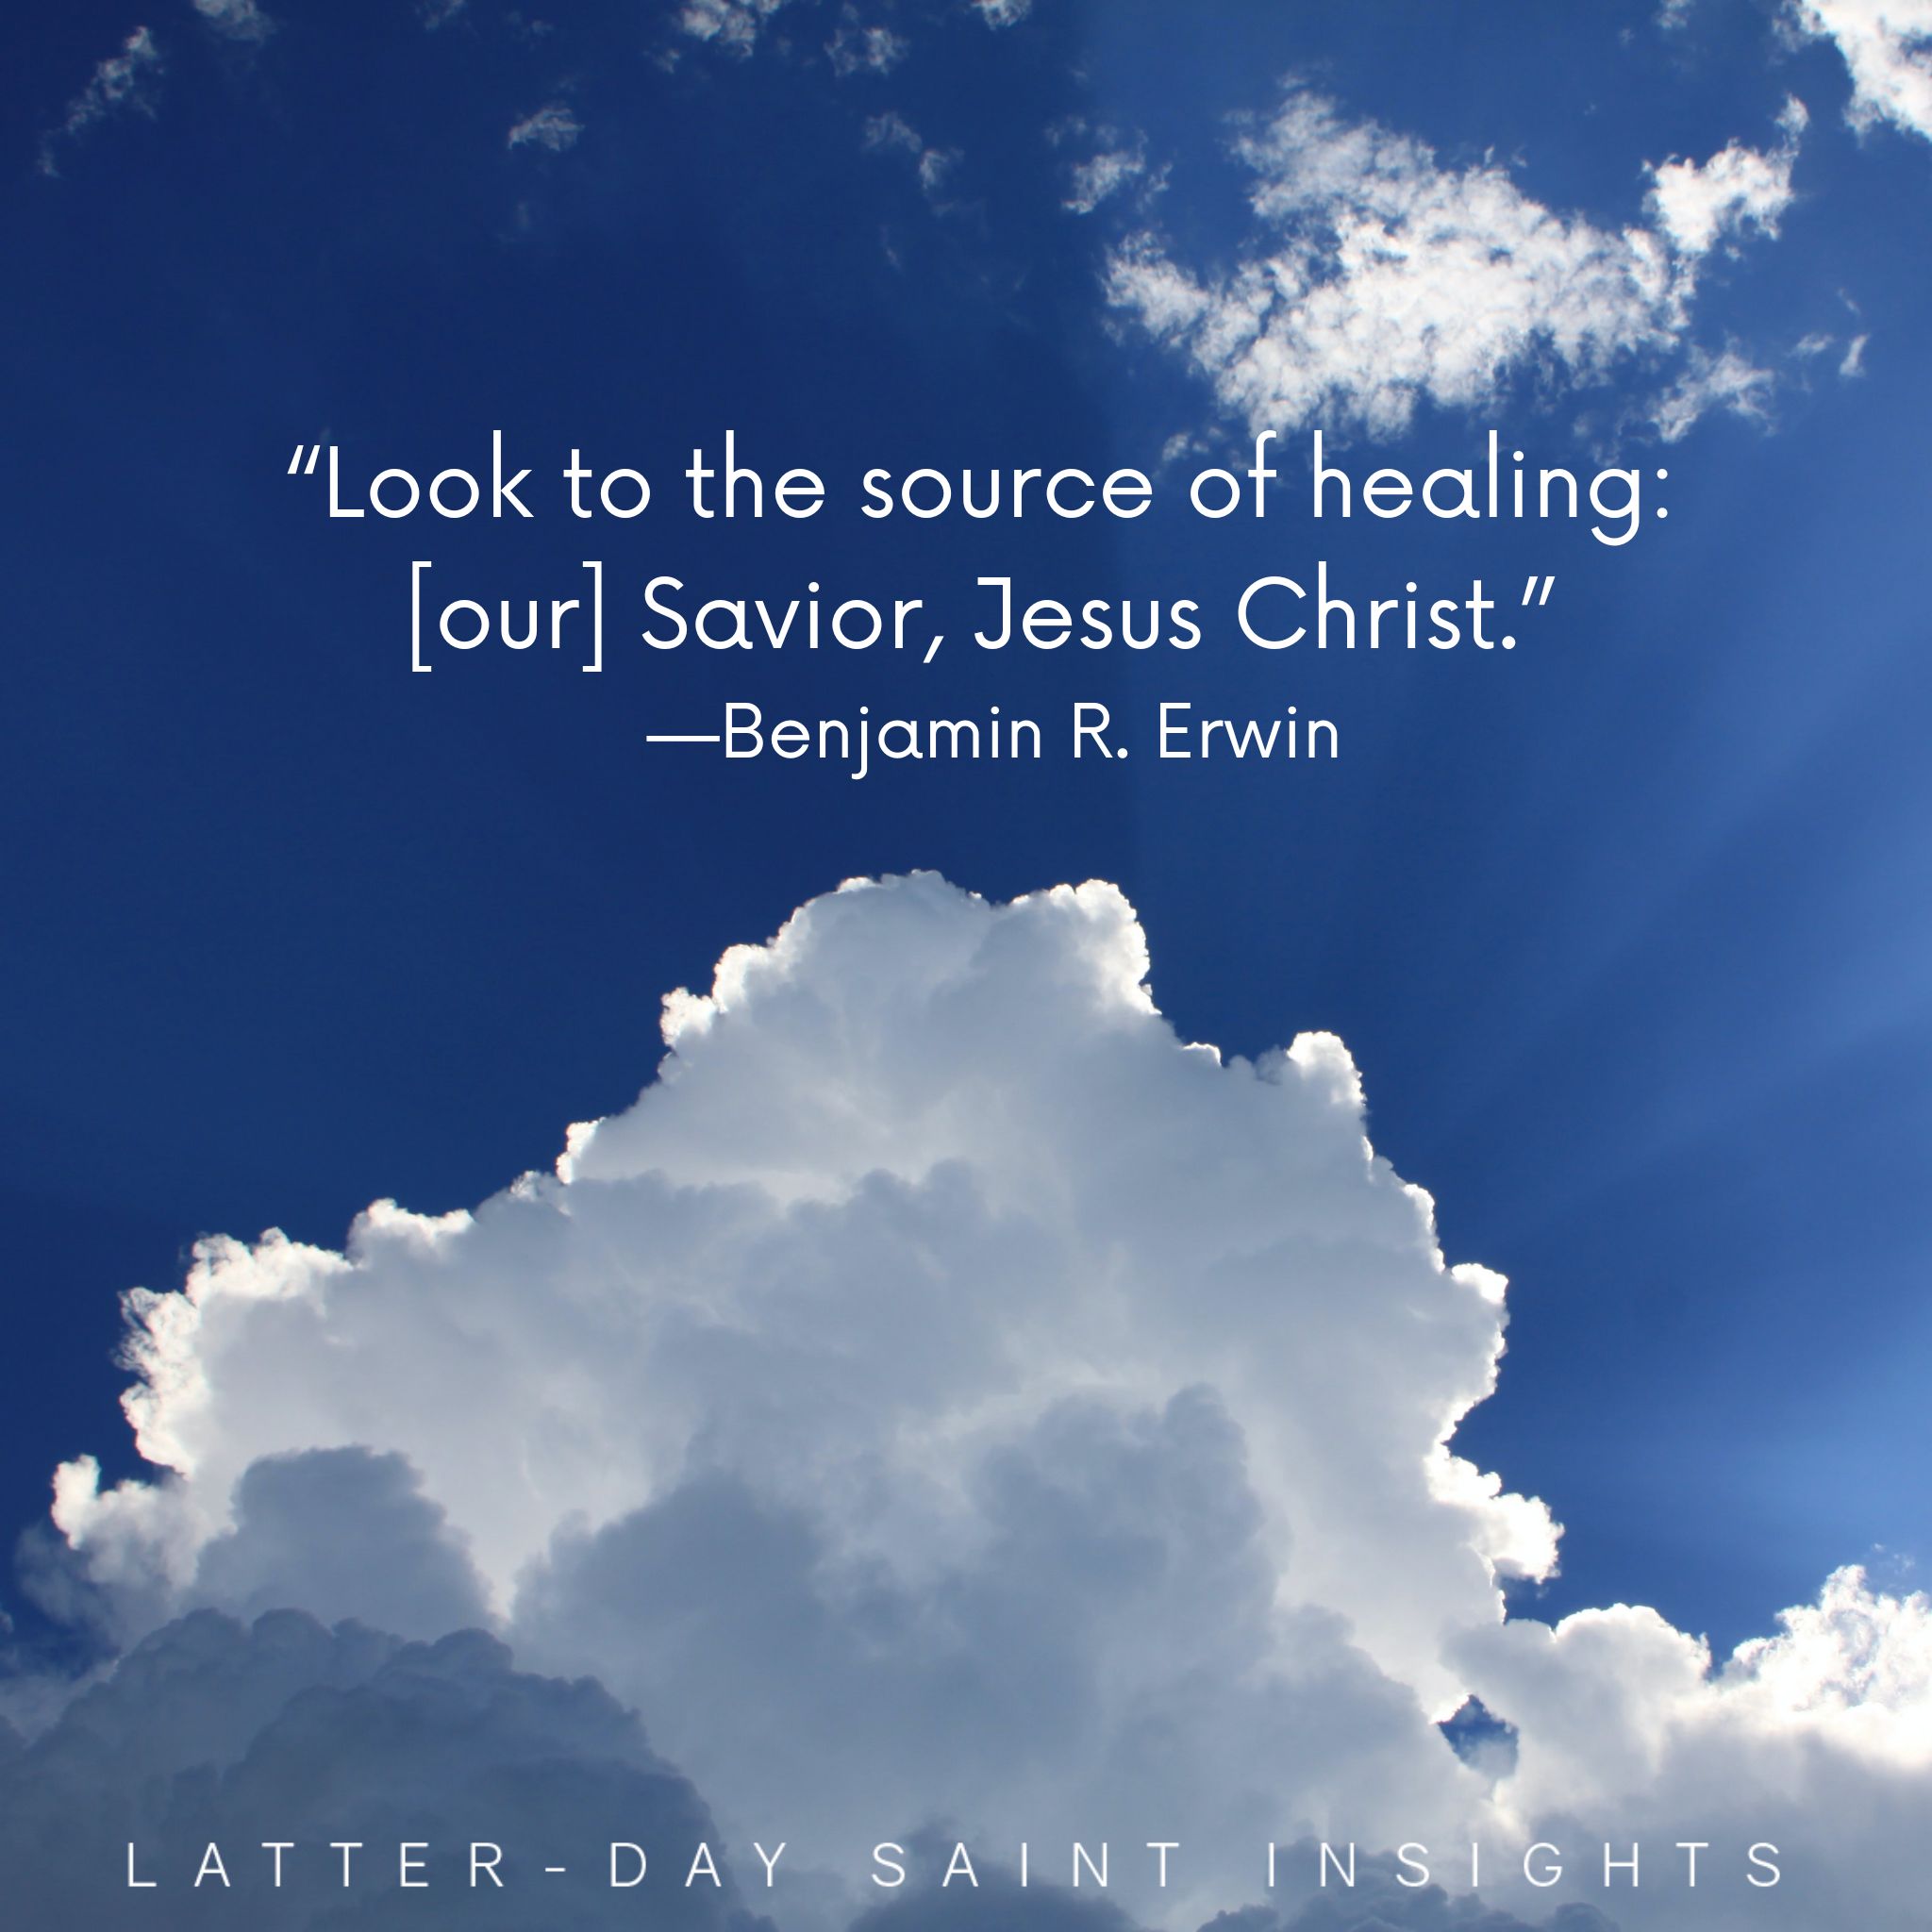 Sun shining through bright white clouds in a blue sky with quote "Look to the source of healing: [our] Savior, Jesus Christ." --Benjamin R. Erwin